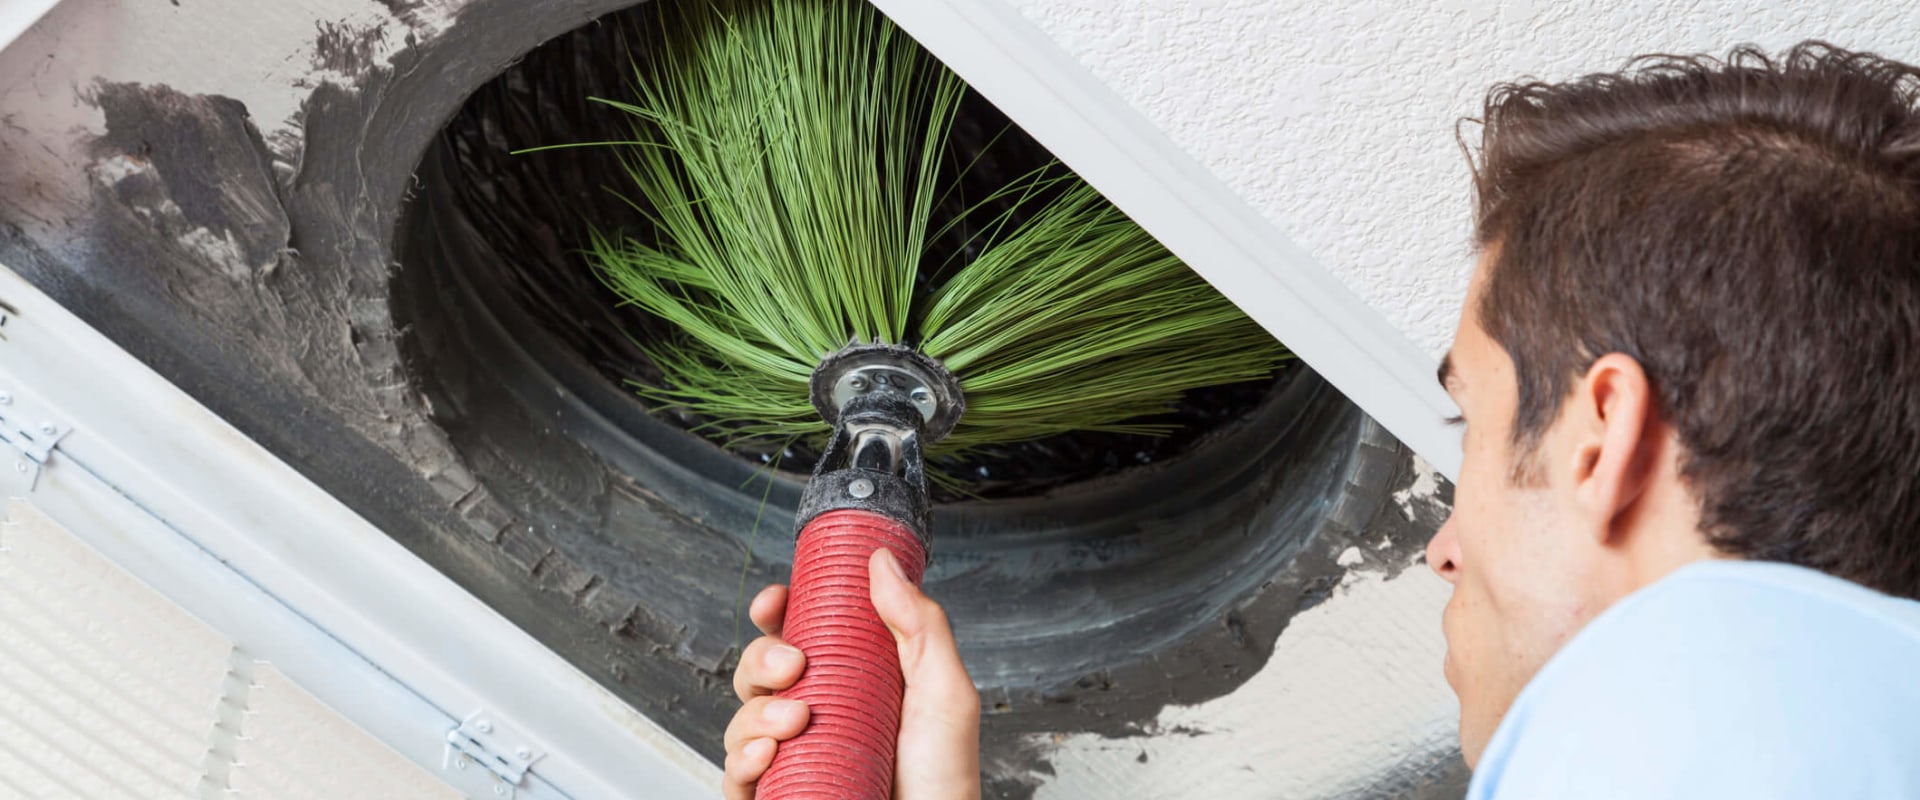 Air Duct Cleaning Services in Pembroke Pines, FL: What You Need to Know